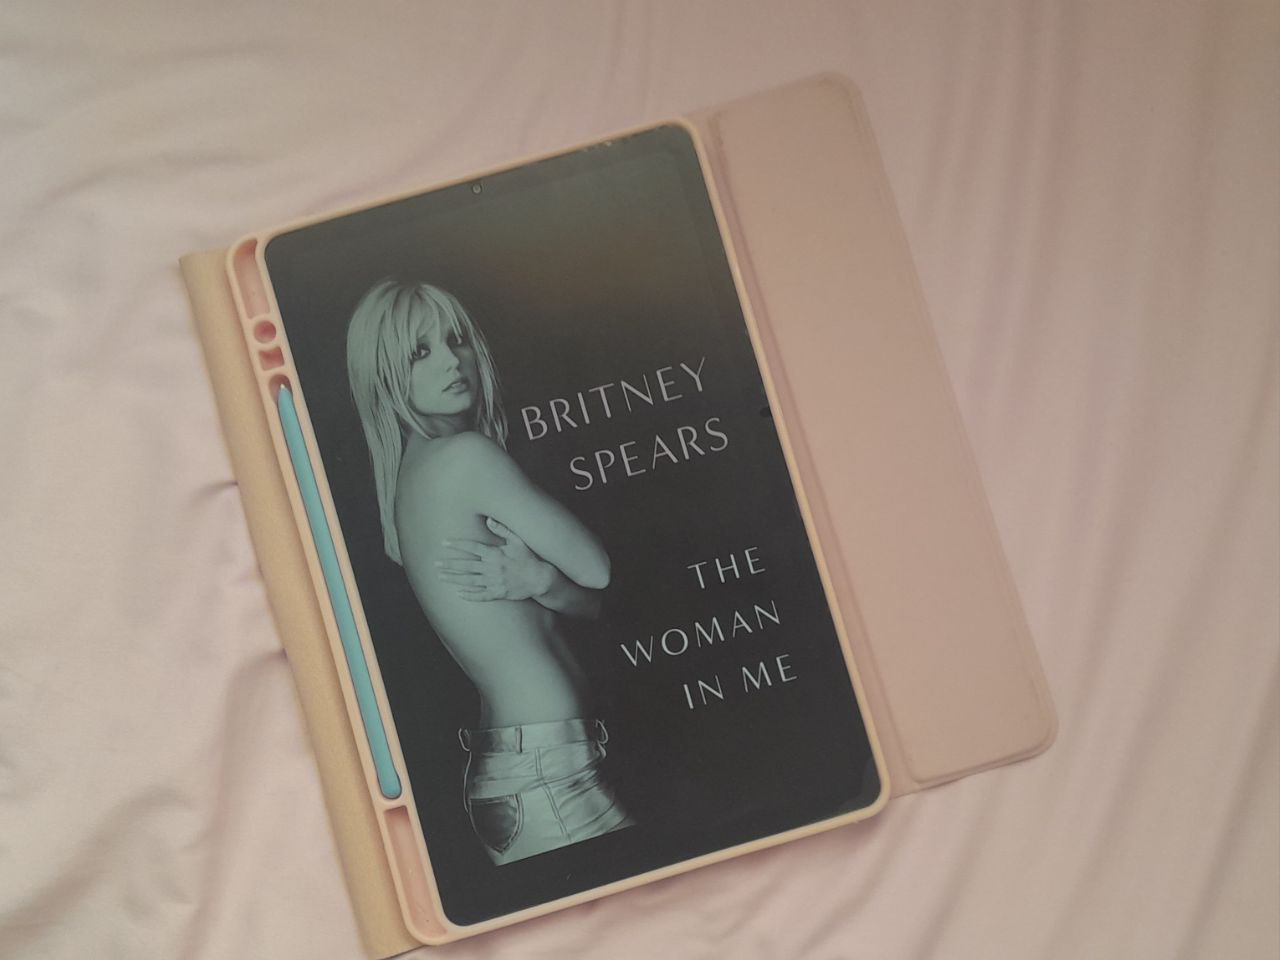 the woman in me - britney spears